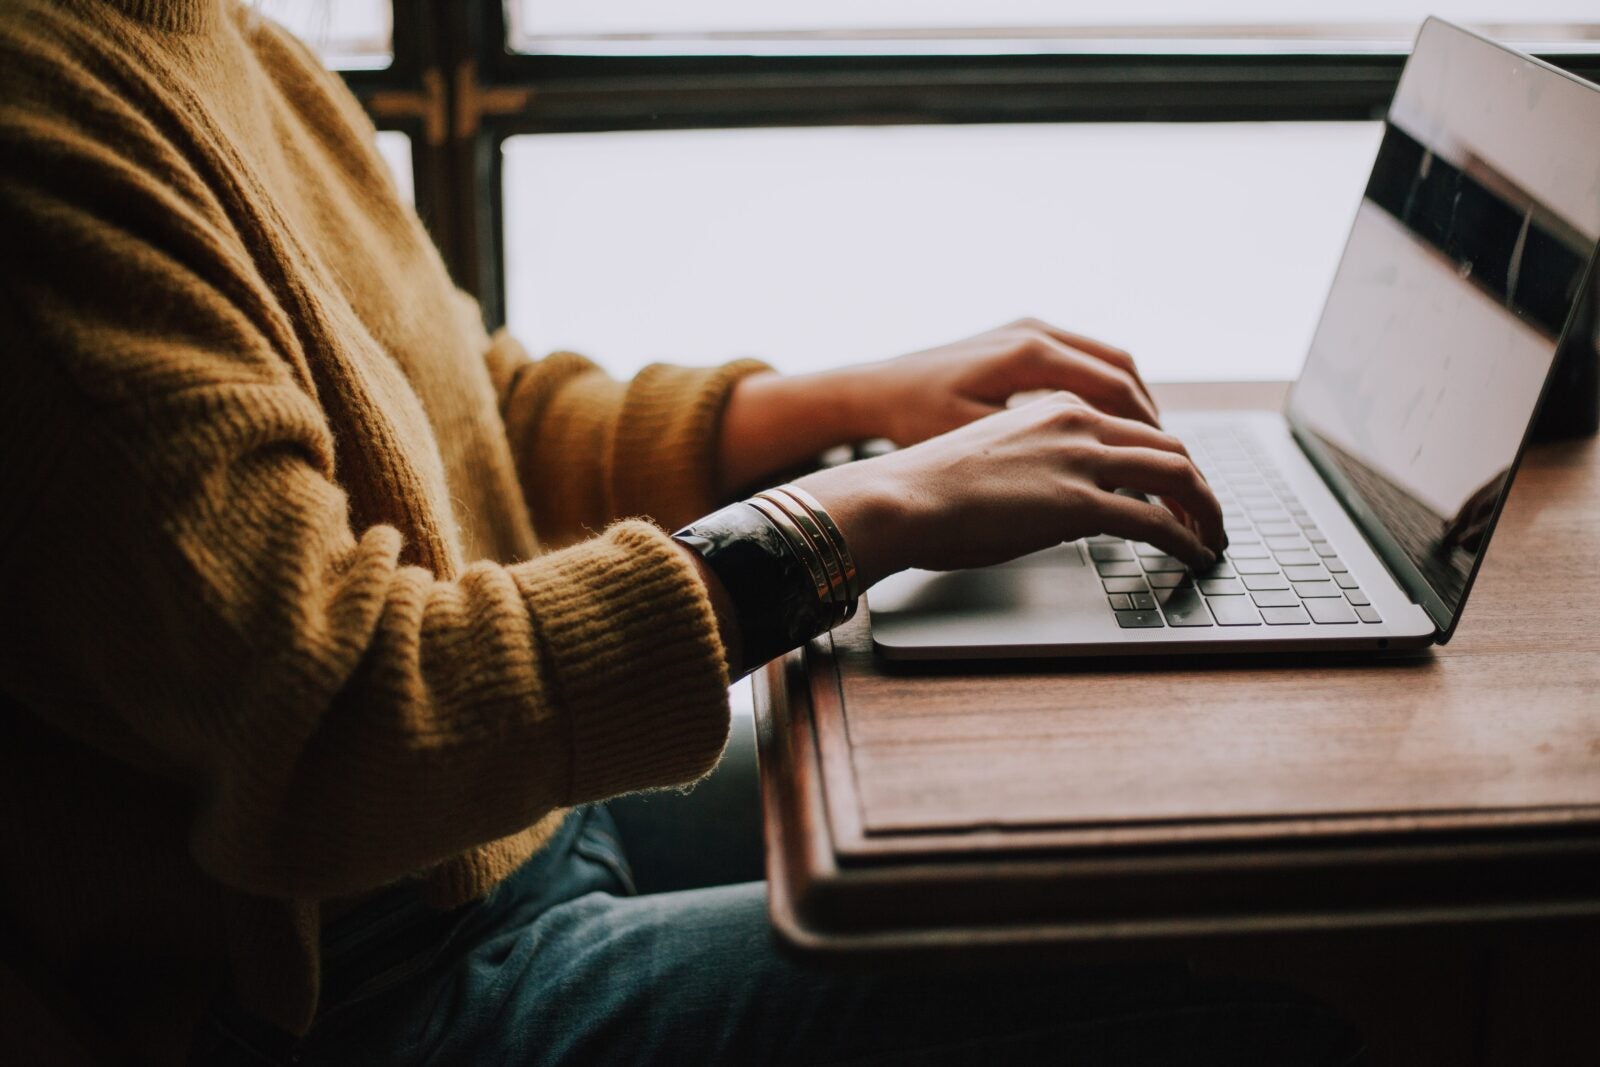 A person wearing a sweater using their laptop on a desk.